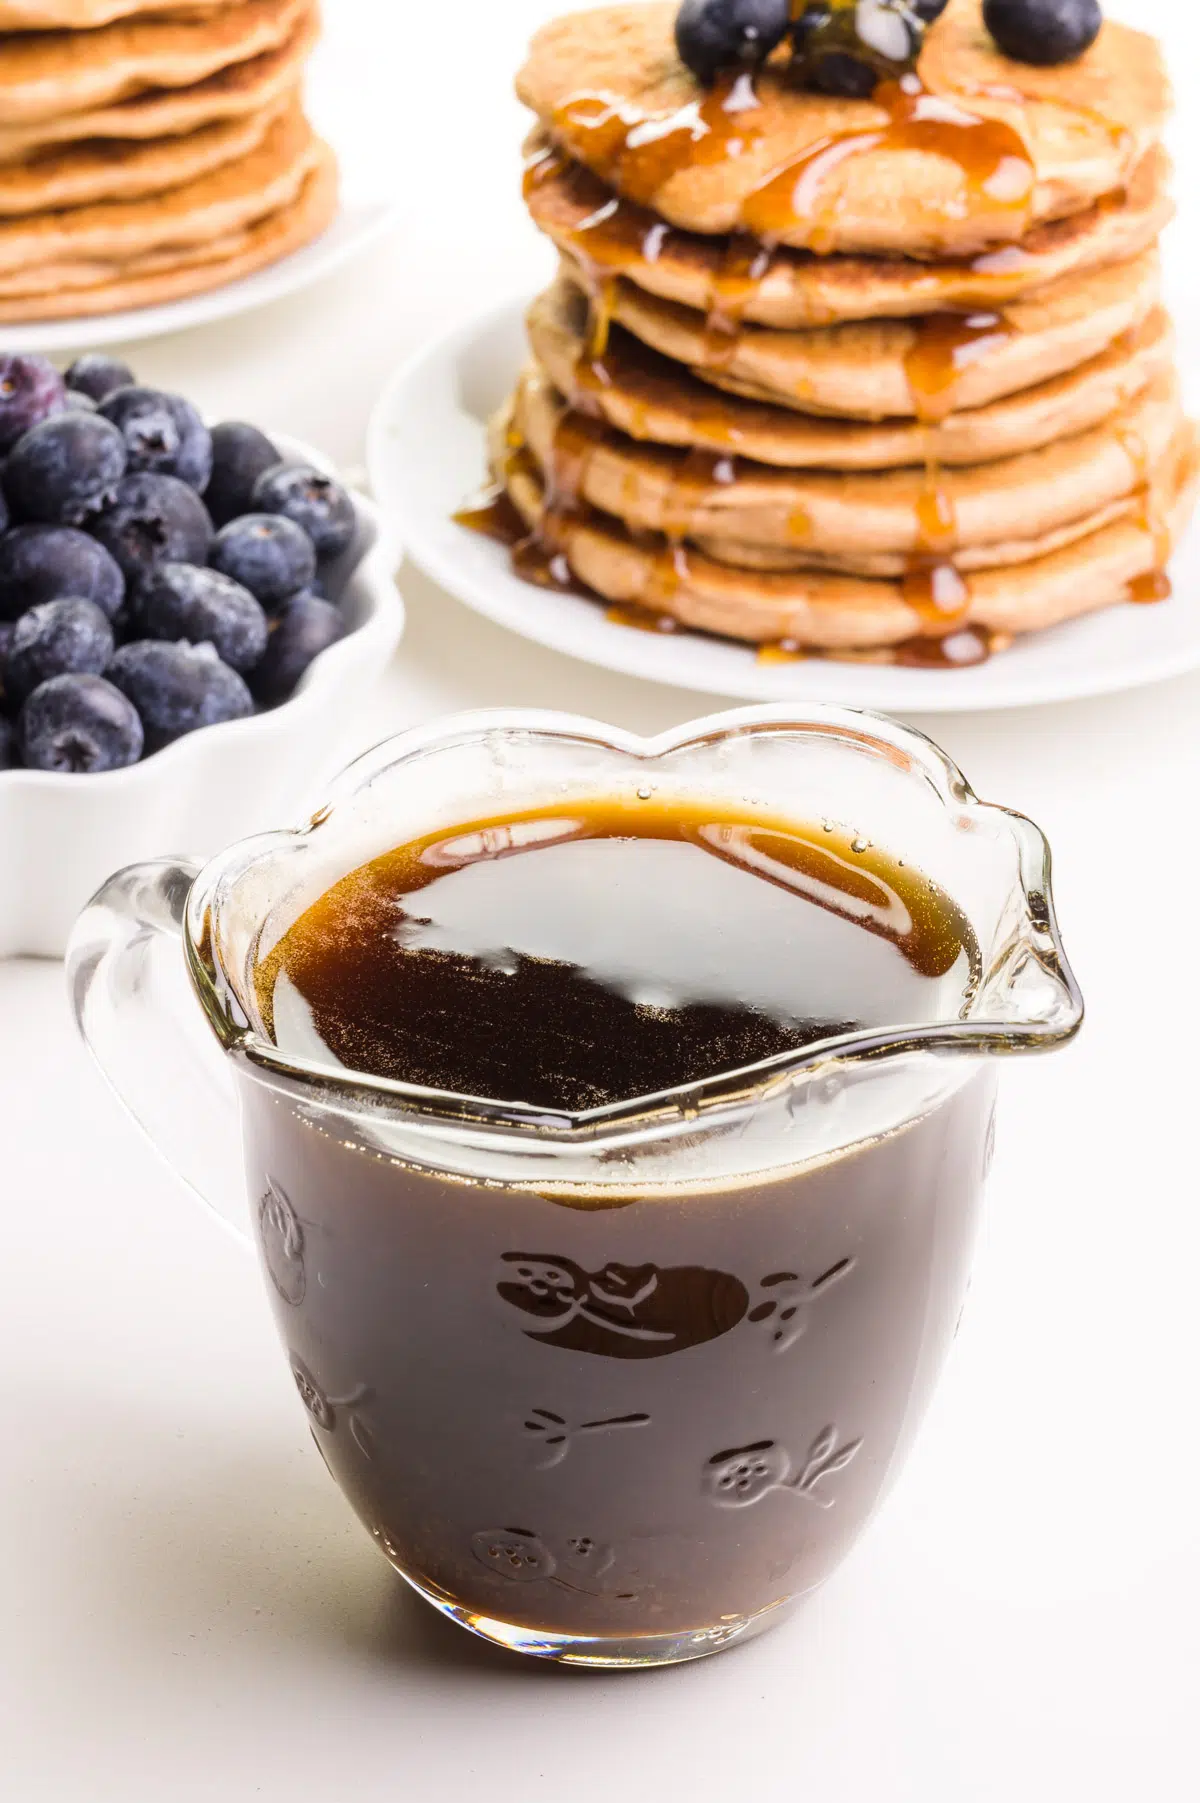 A glass pitcher of maple syrup substitute sits in front of a bowl of fresh blueberries and plates of pancakes.